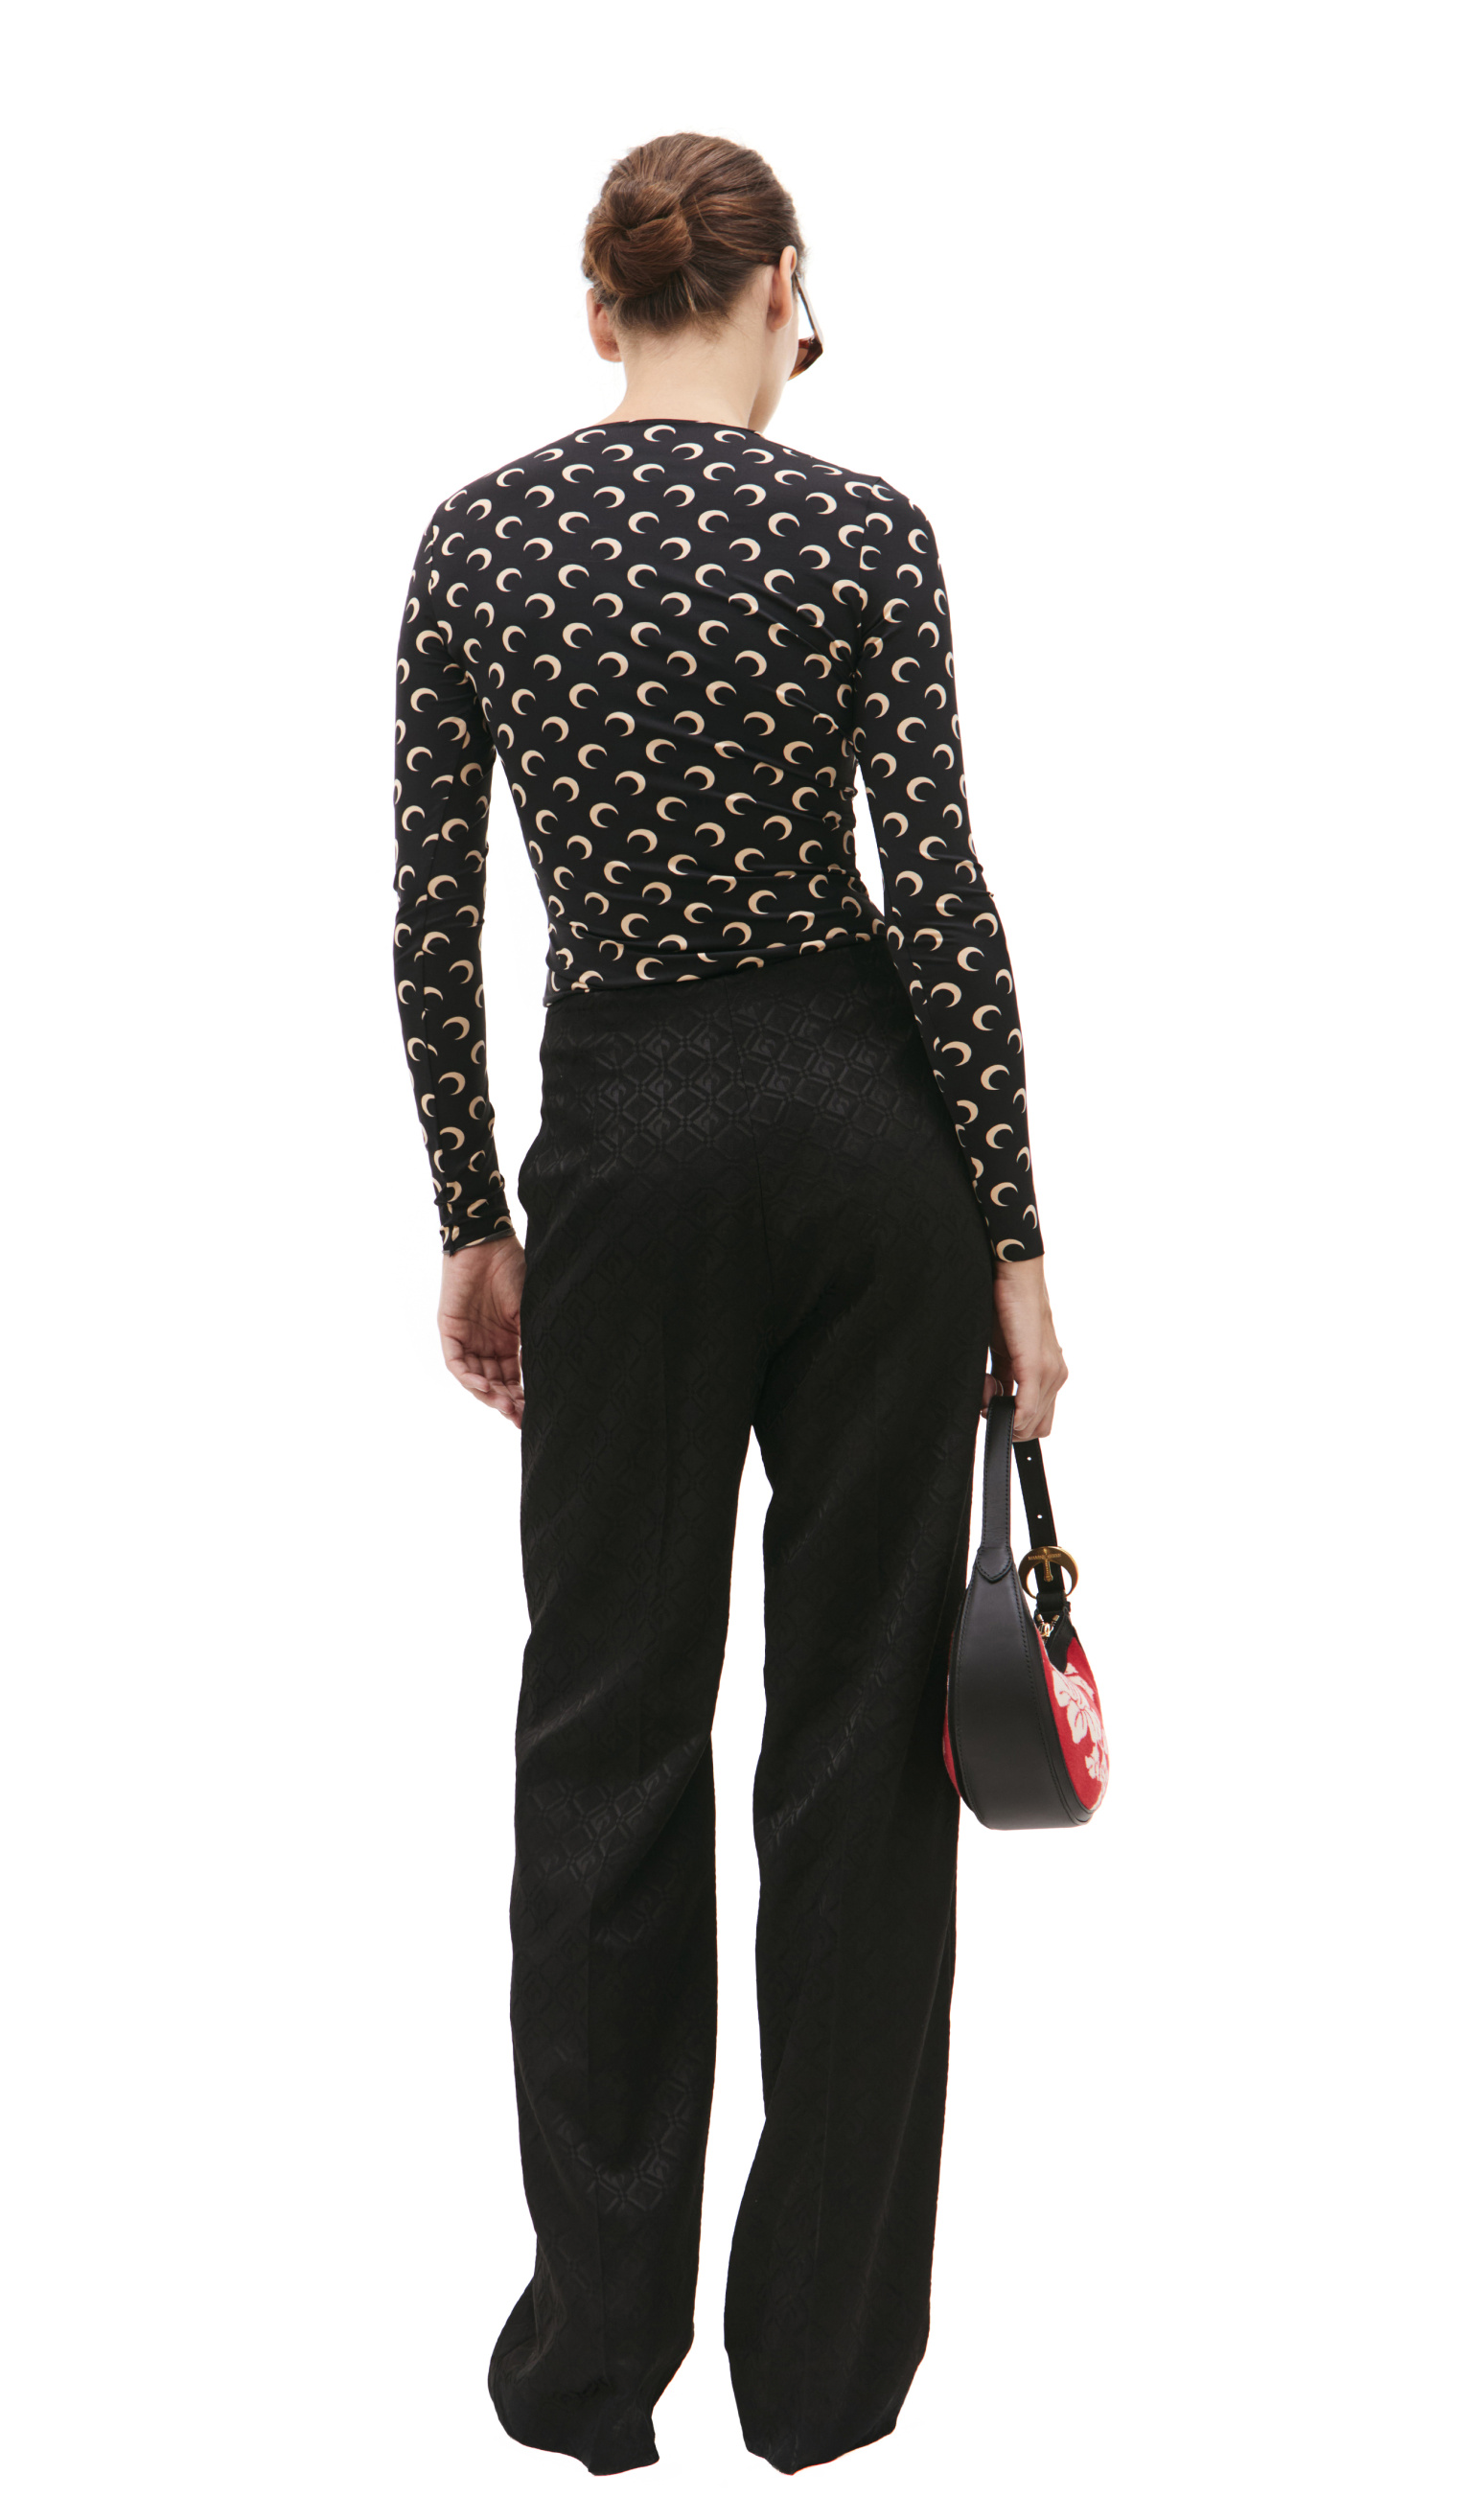 MARINE SERRE Straight-leg pants with cut-out detailing